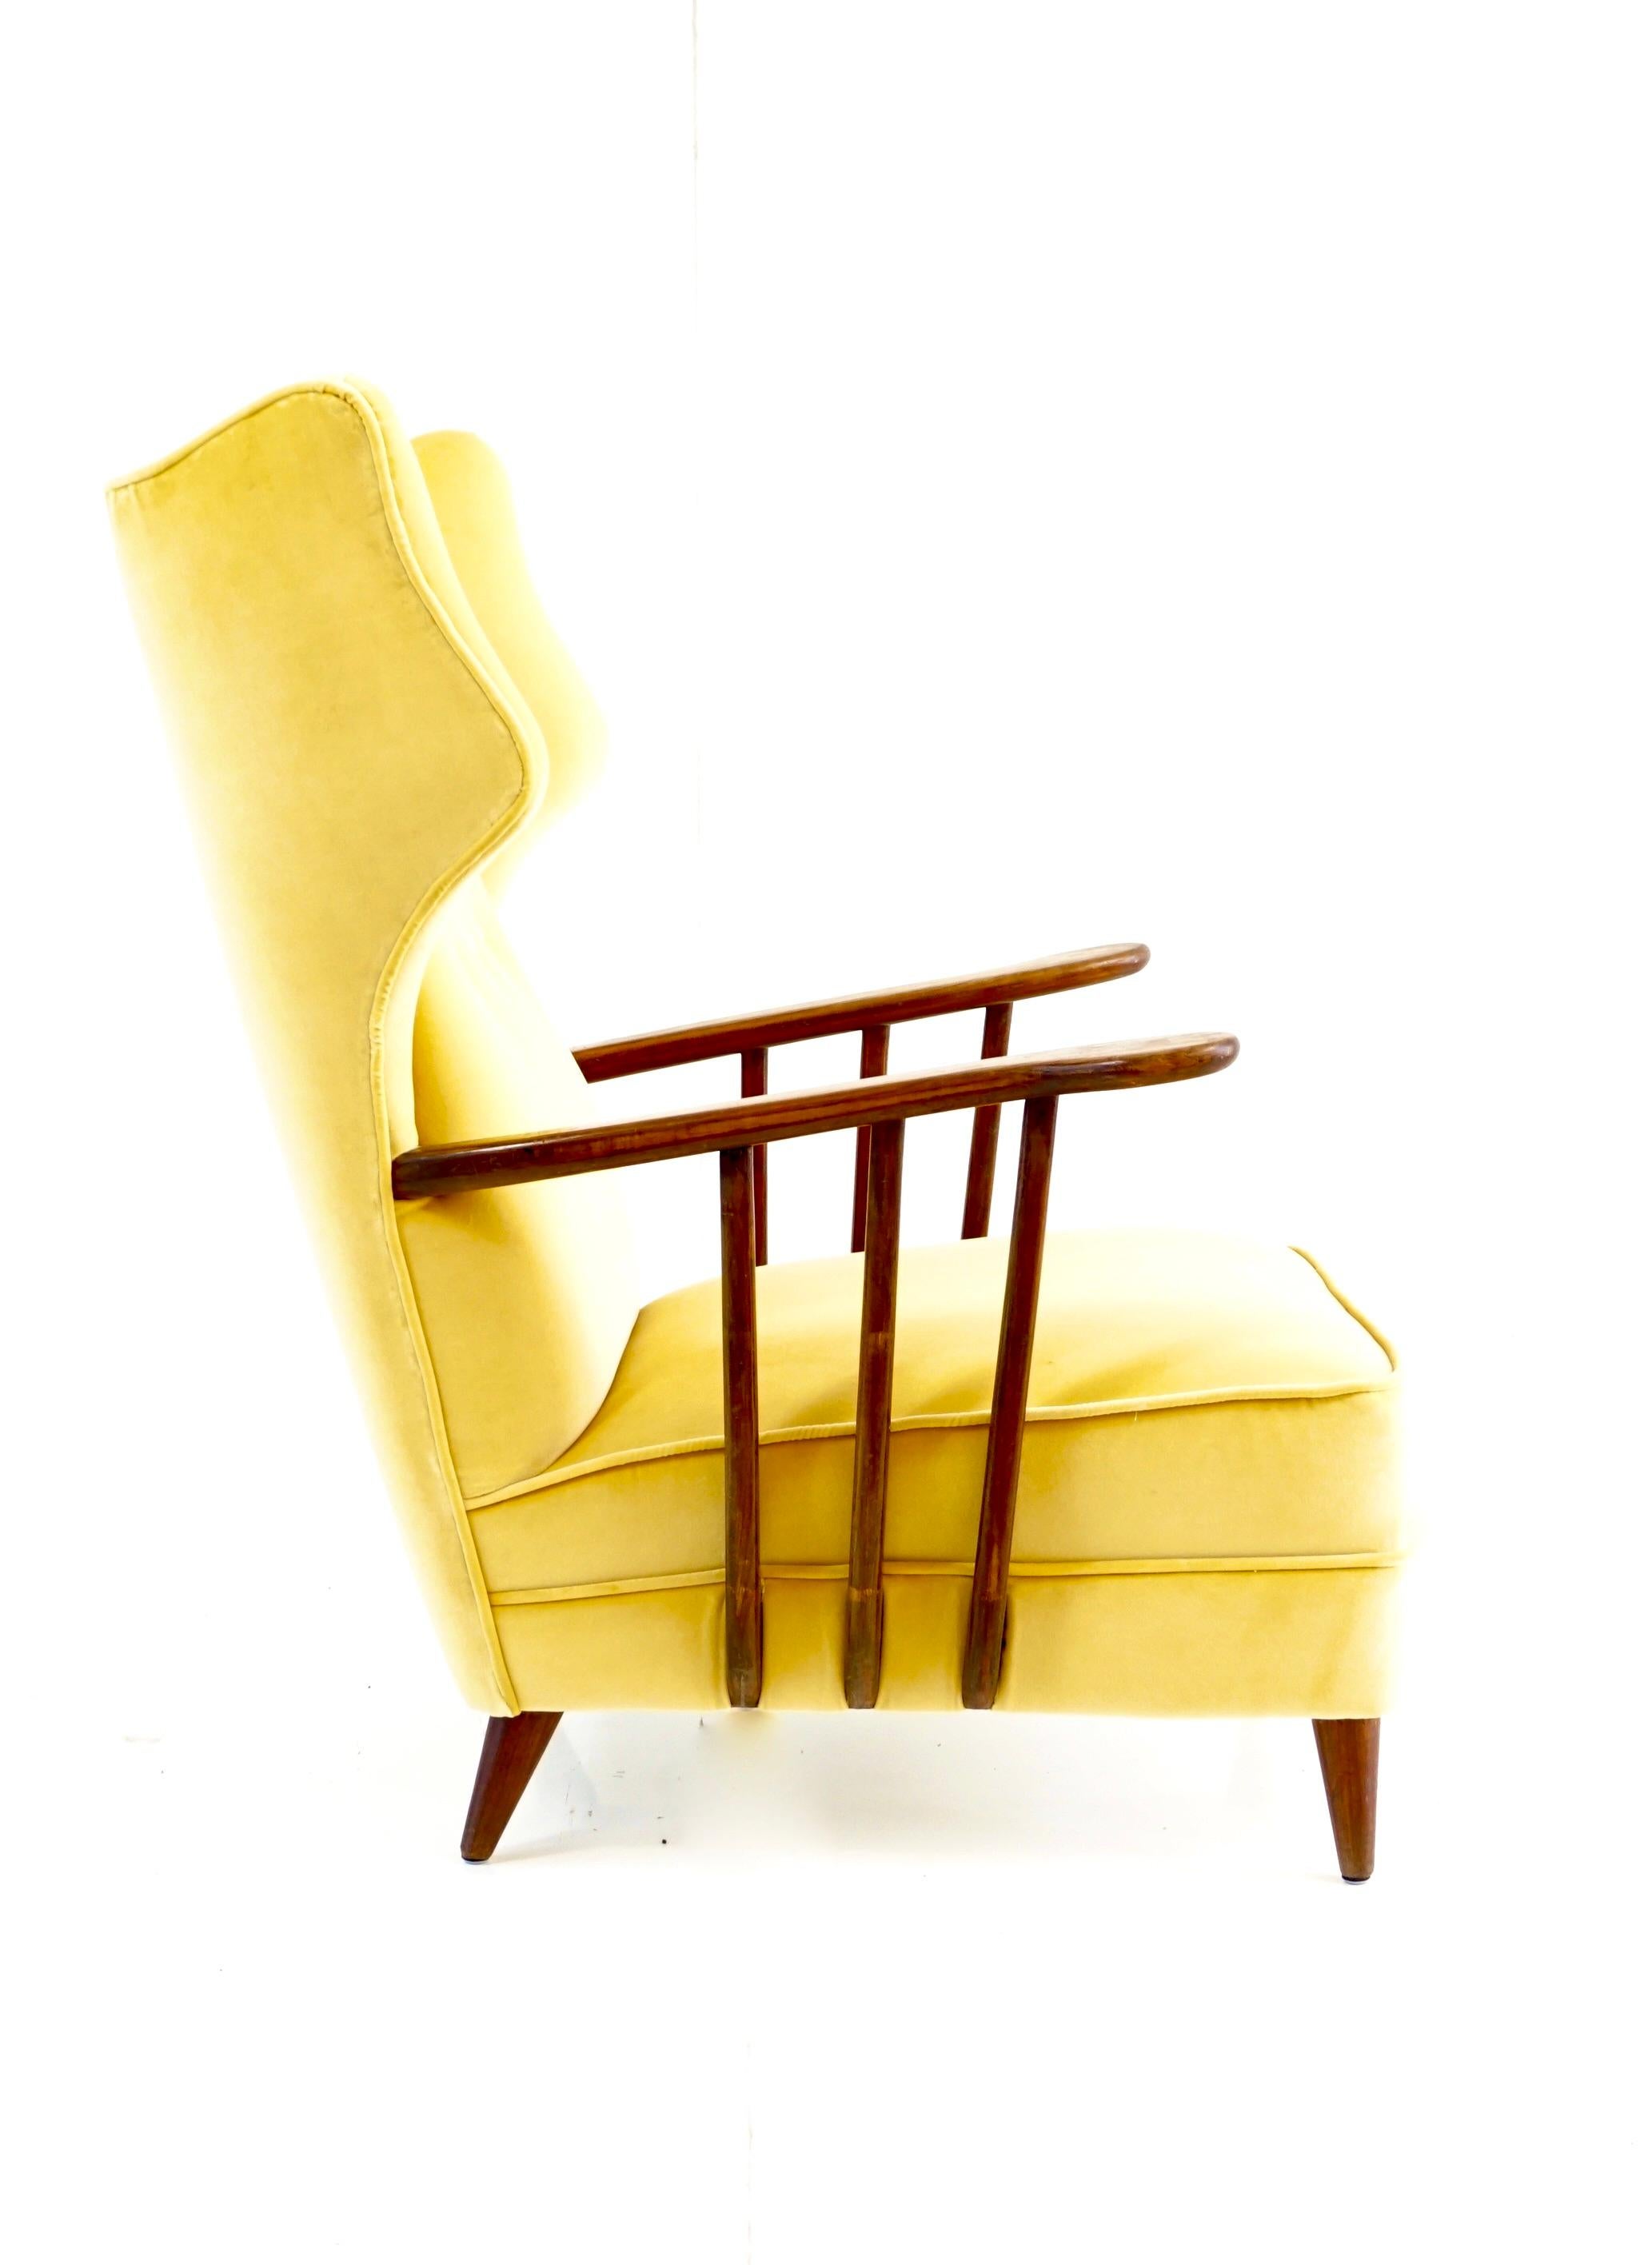 Ico Parisi bergere armchair, 1950
manufactured by Ariberto Colombo, Cantù 
walnut and re-upholstery in yellow velvet 
very good condition 
iconic design armchair
Measures: height: 105cm, 77x 93 cm; height seat: 37 cm, height arm: 62cm